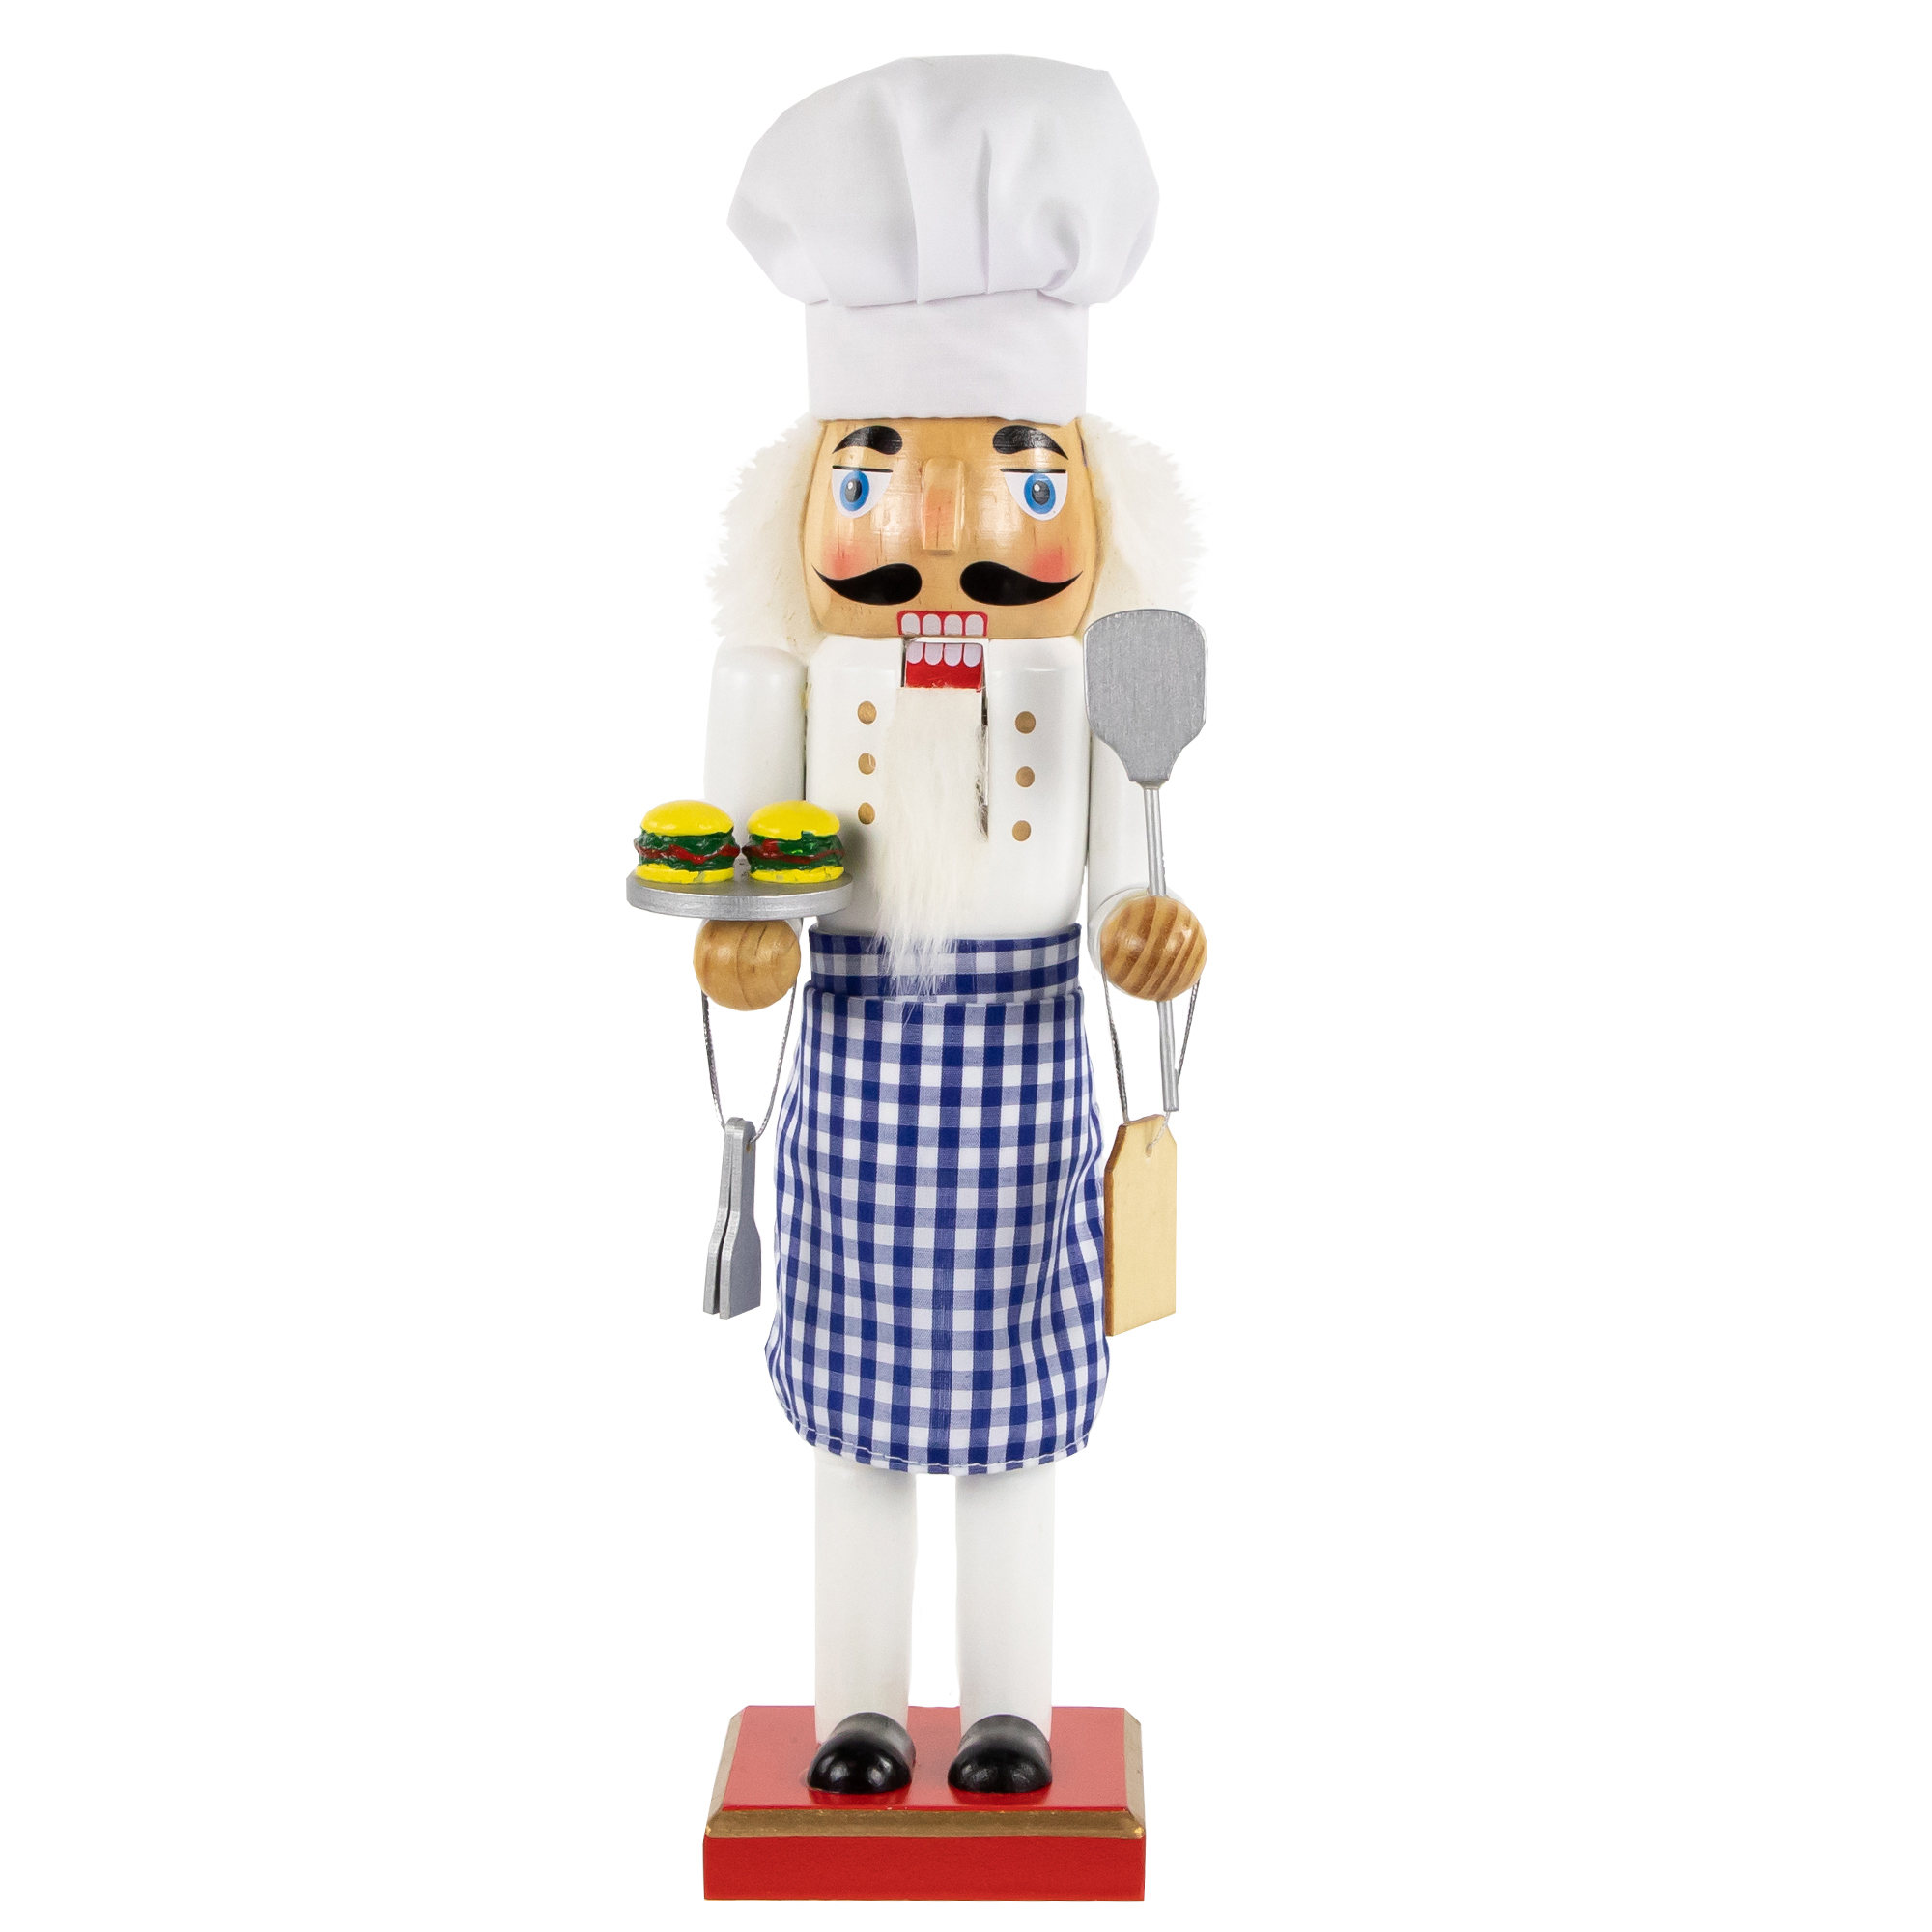 Nutcracker Factory 14" White and Blue Chef with Gingham Apron Wooden Christmas Nutcracker